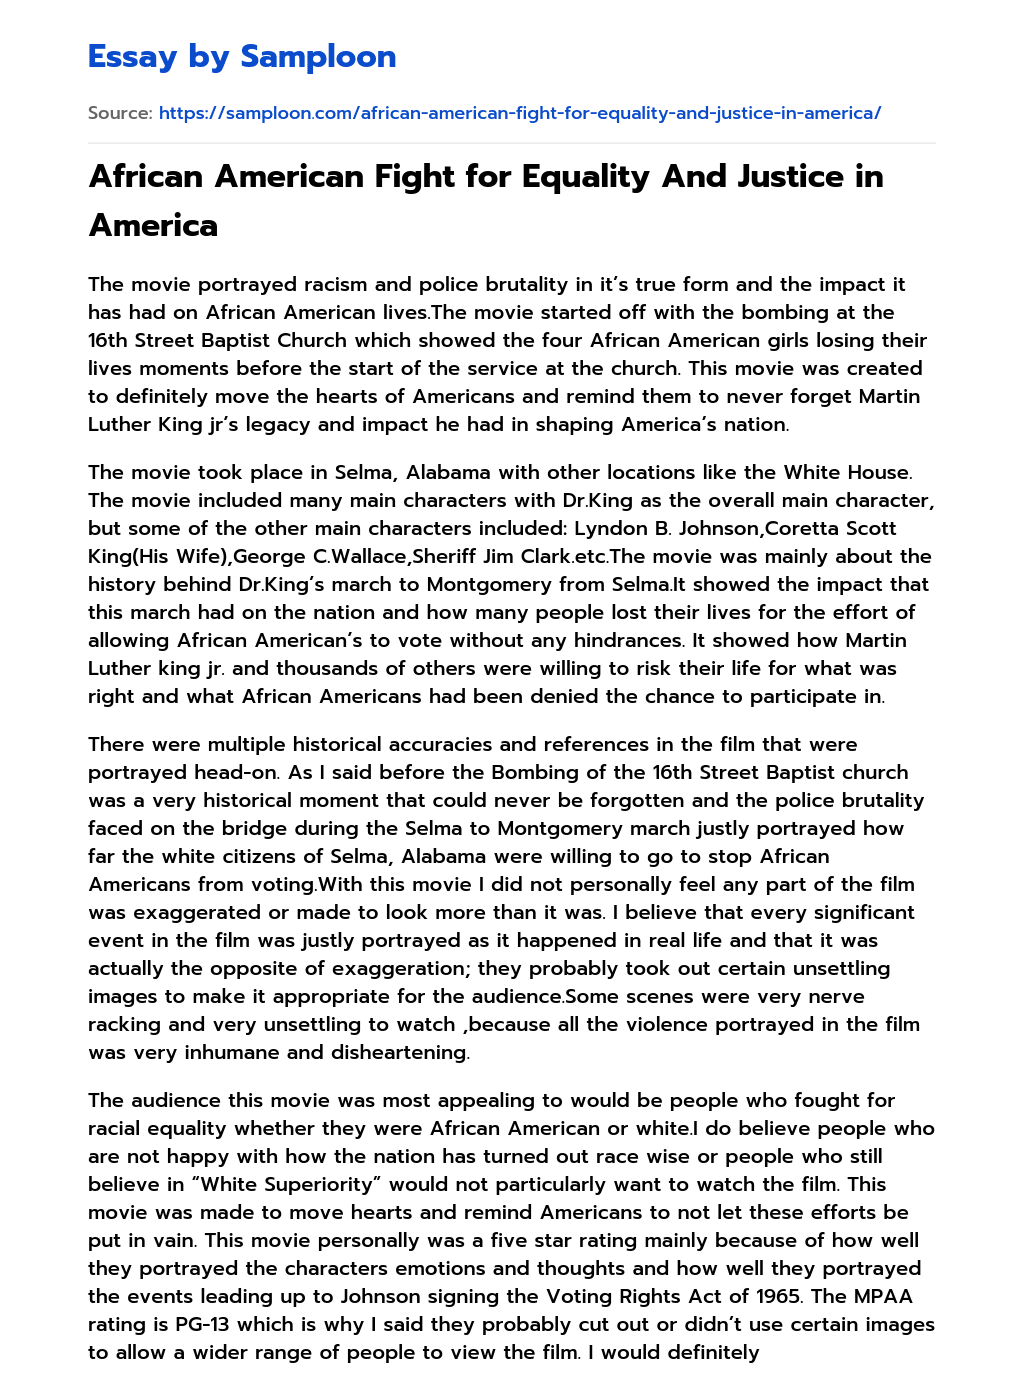 African American Fight for Equality And Justice in America essay